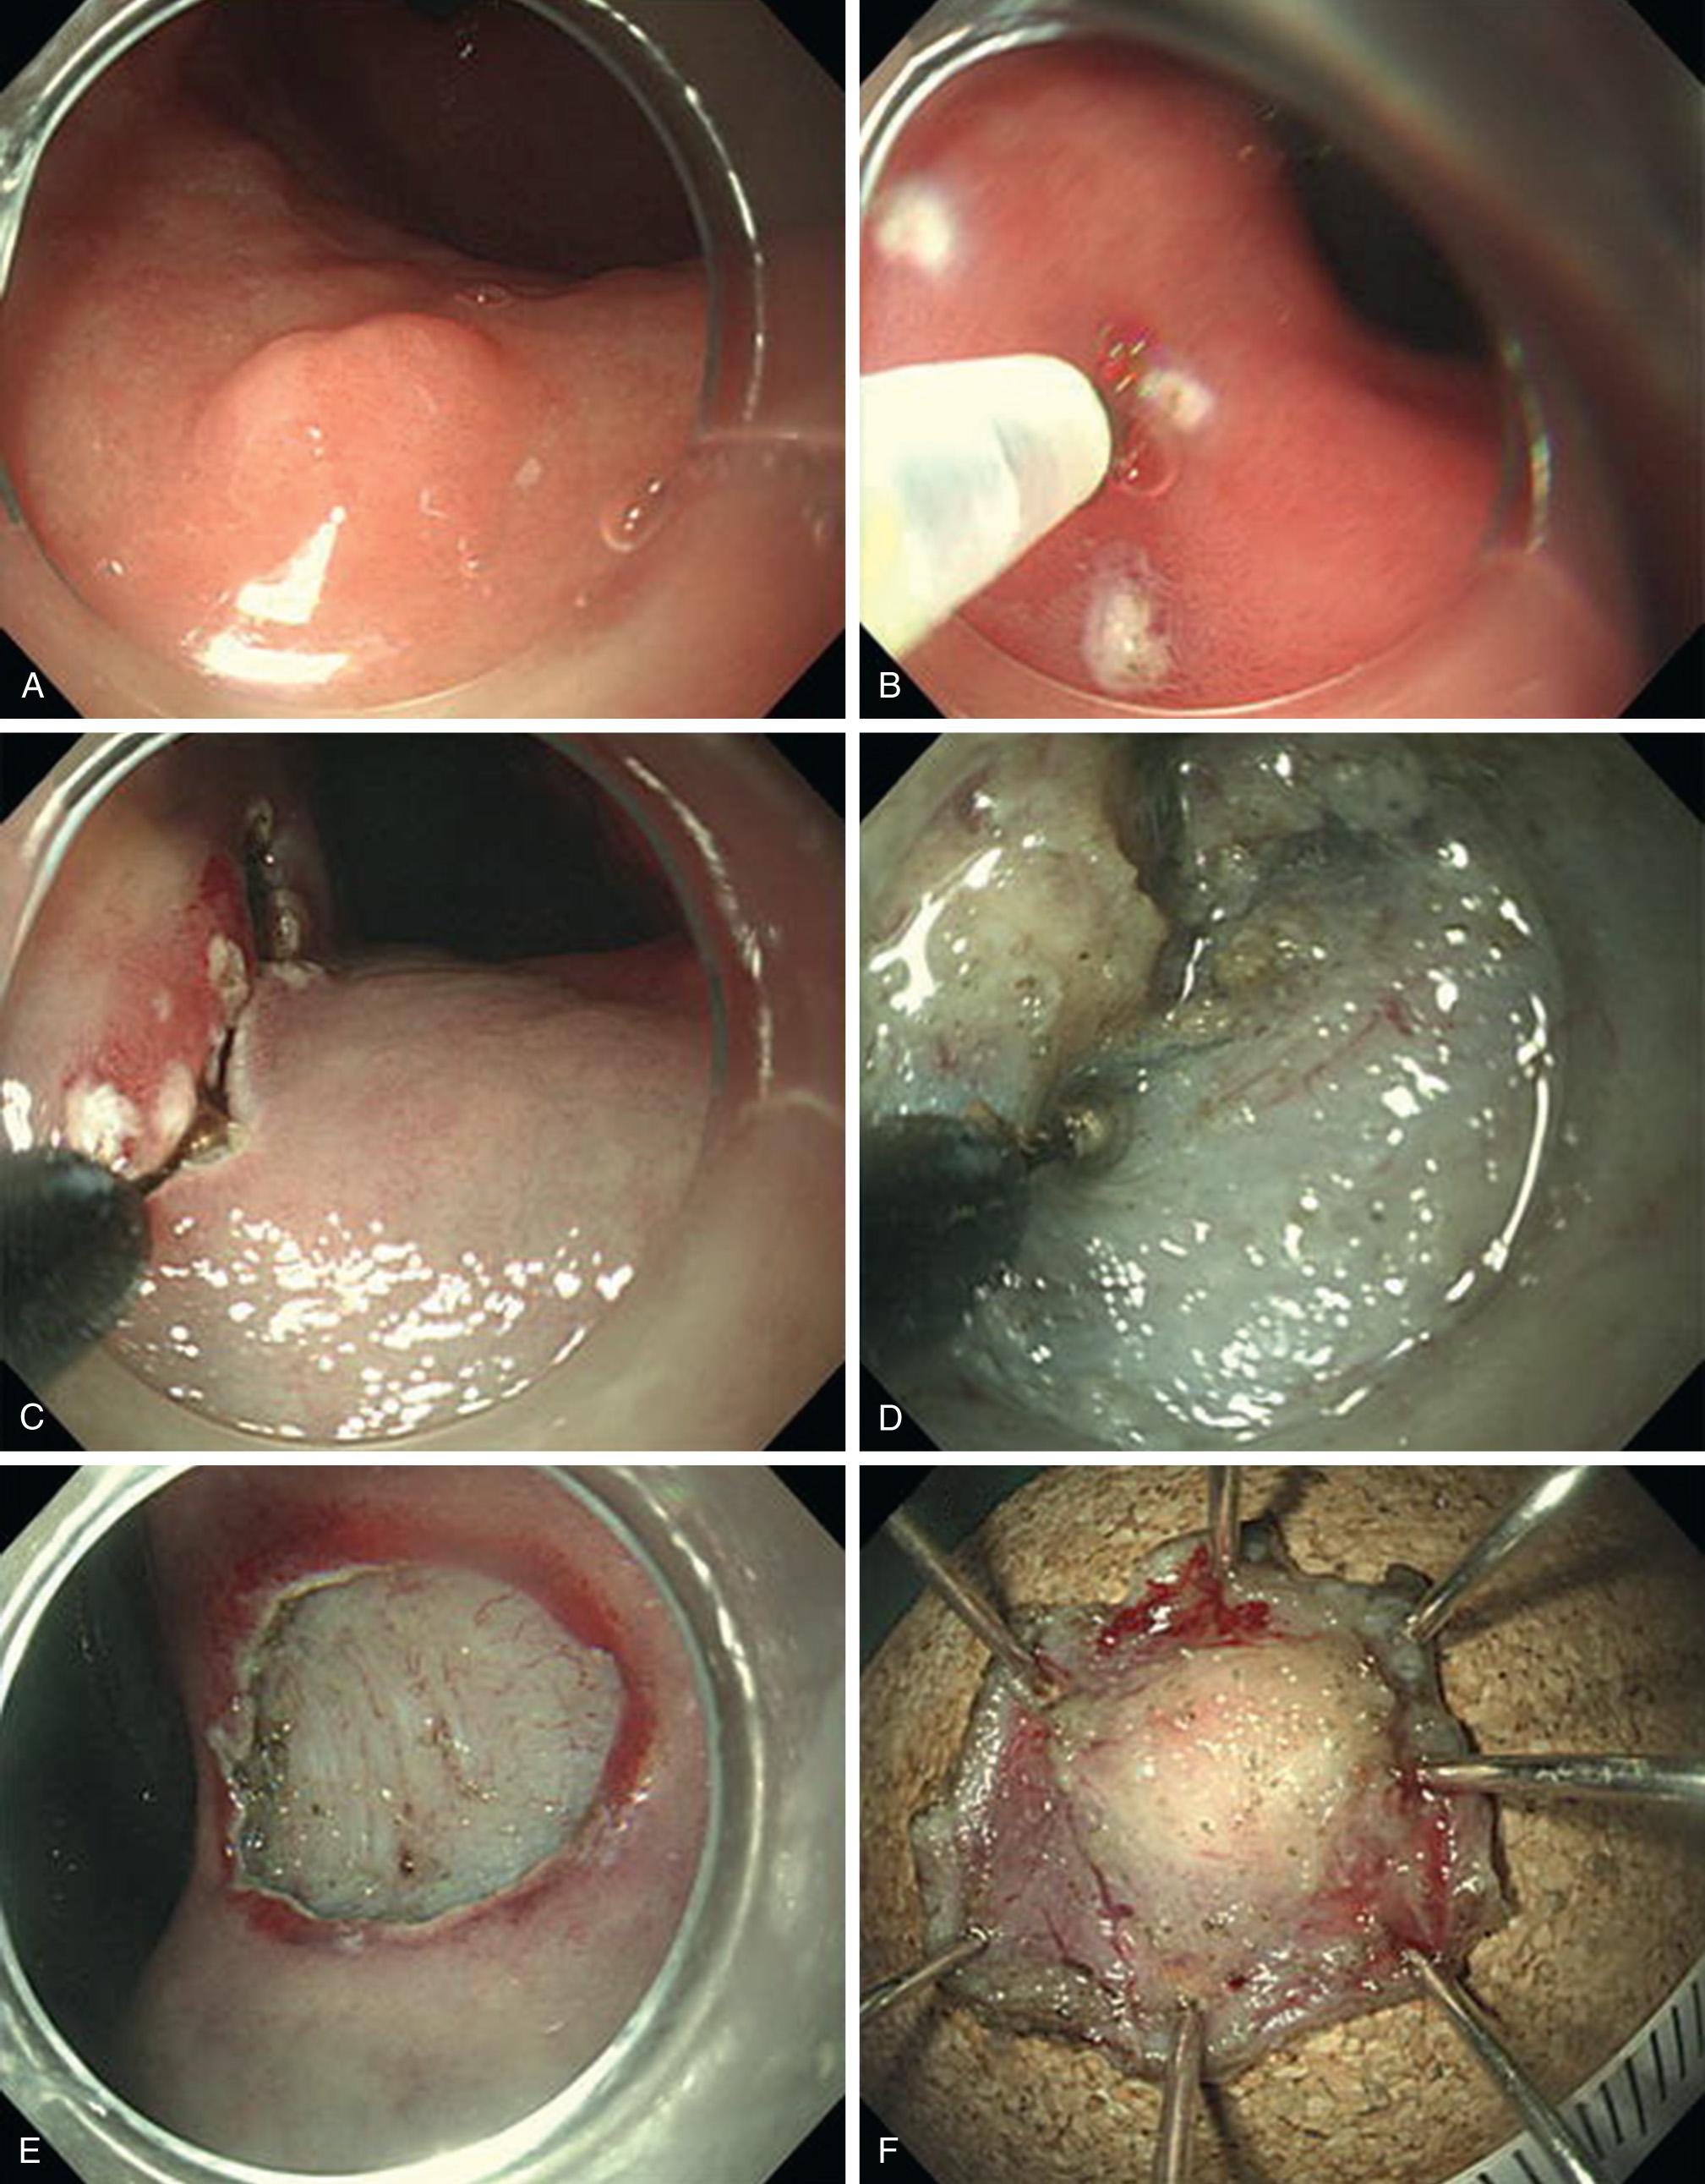 FIGURE 46.5, Endoscopic submucosal dissection of a submucosal tumor (SMT) in the stomach. (A) An SMT is observed in the upper body of the stomach. (B) Marking dots are made around the lesion and saline with epinephrine and indigo carmine is then injected into the submucosa beneath the lesion. (C) A complete circumferential incision is made using an insulated-tip (IT) knife. (D) Submucosal dissection is made using an IT knife. (E) The lesion is completely removed. (F) Inner surface of the resected specimen.